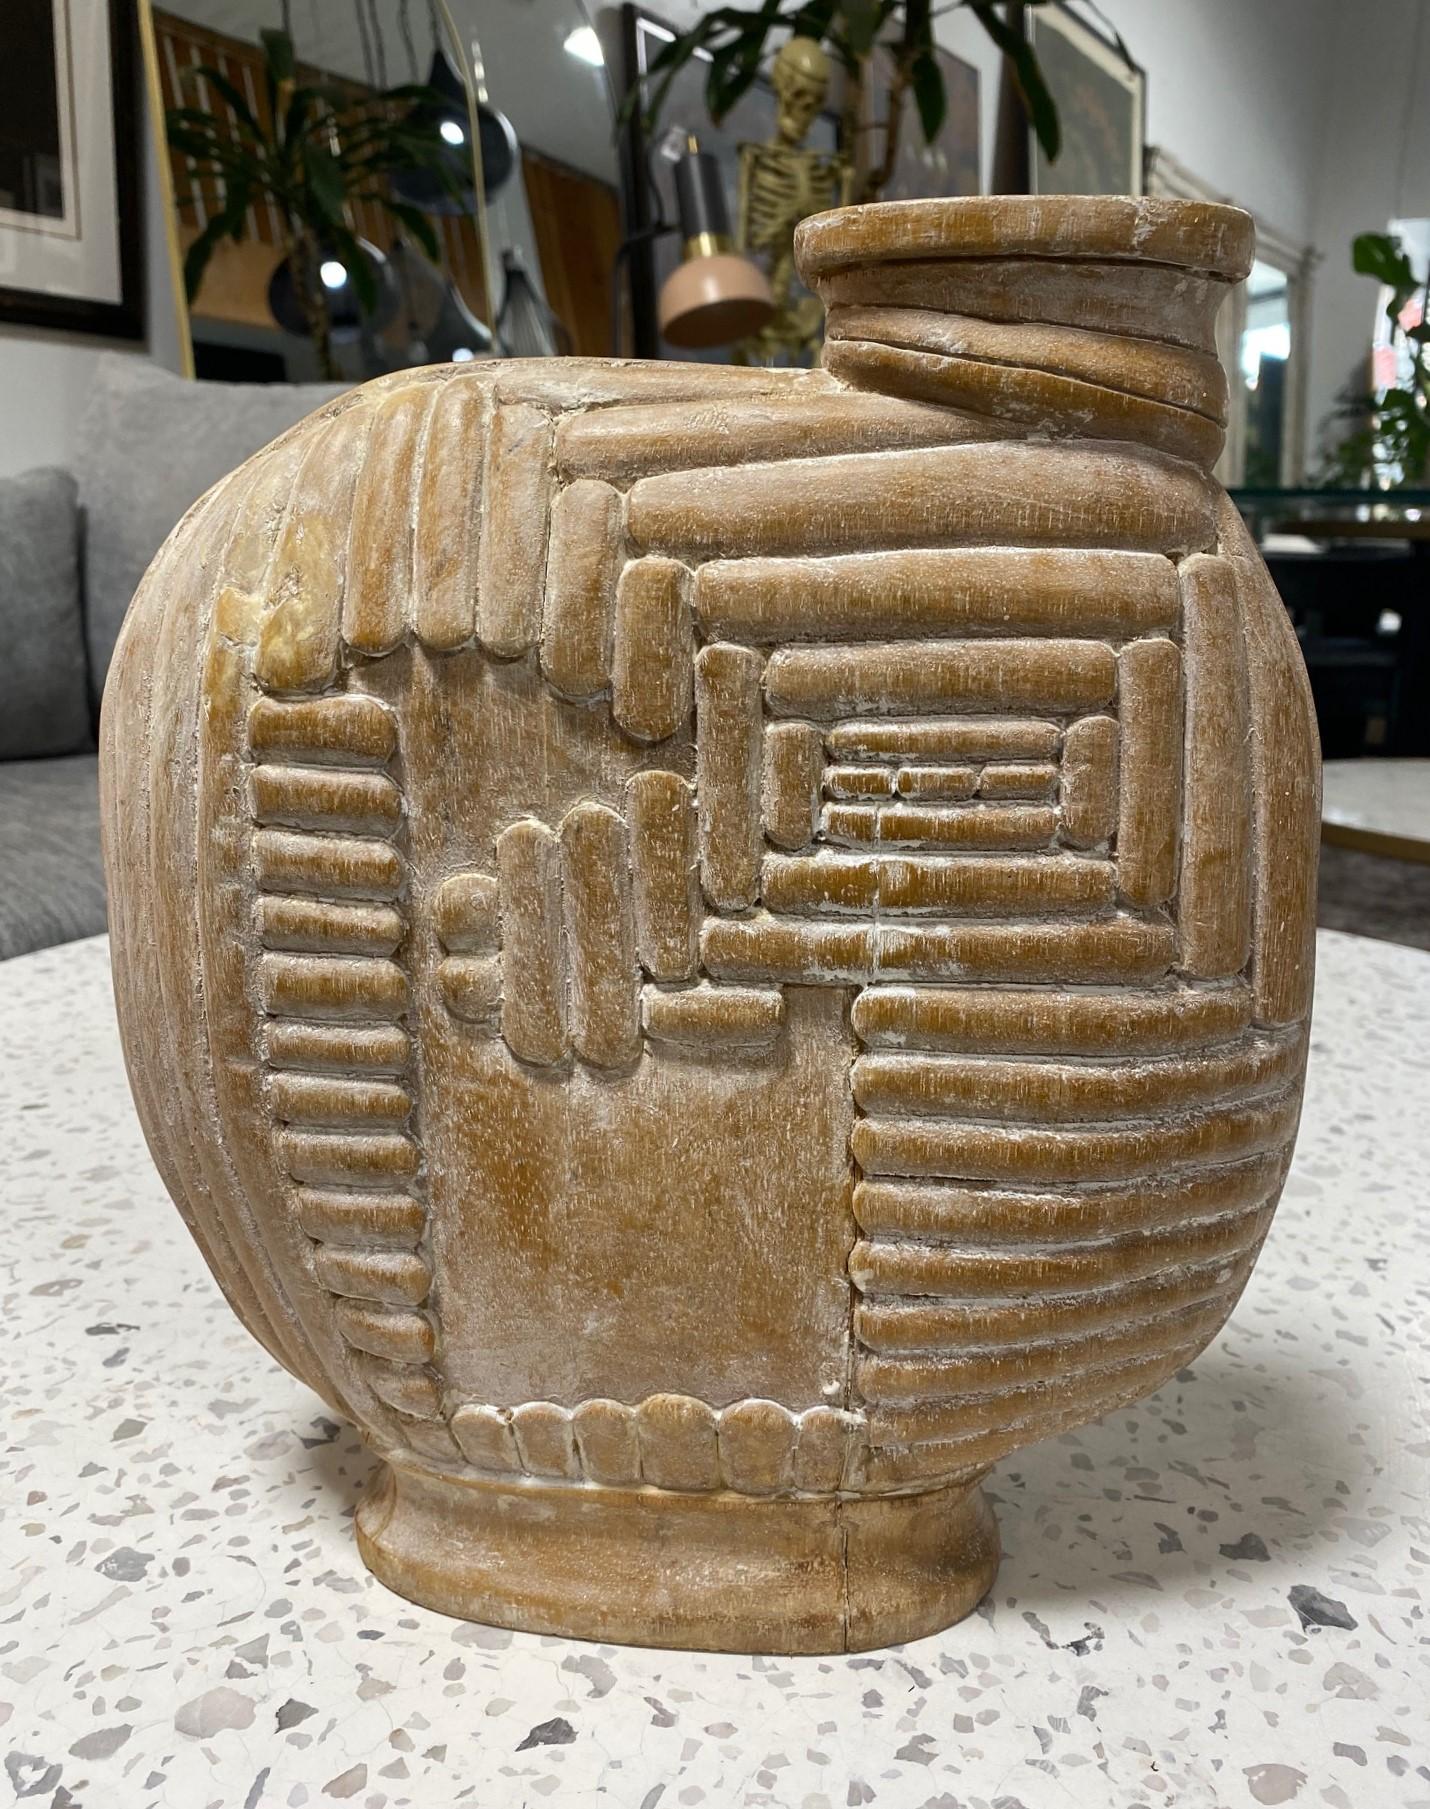 A beautiful Mid-Century Modern hand-carved natural organic wood art sculpture/ vase/ vessel.  It appears to have been made from a single piece of wood.  

Likely from the 1960s.  

A very bold statement work.  Would be a great addition to any